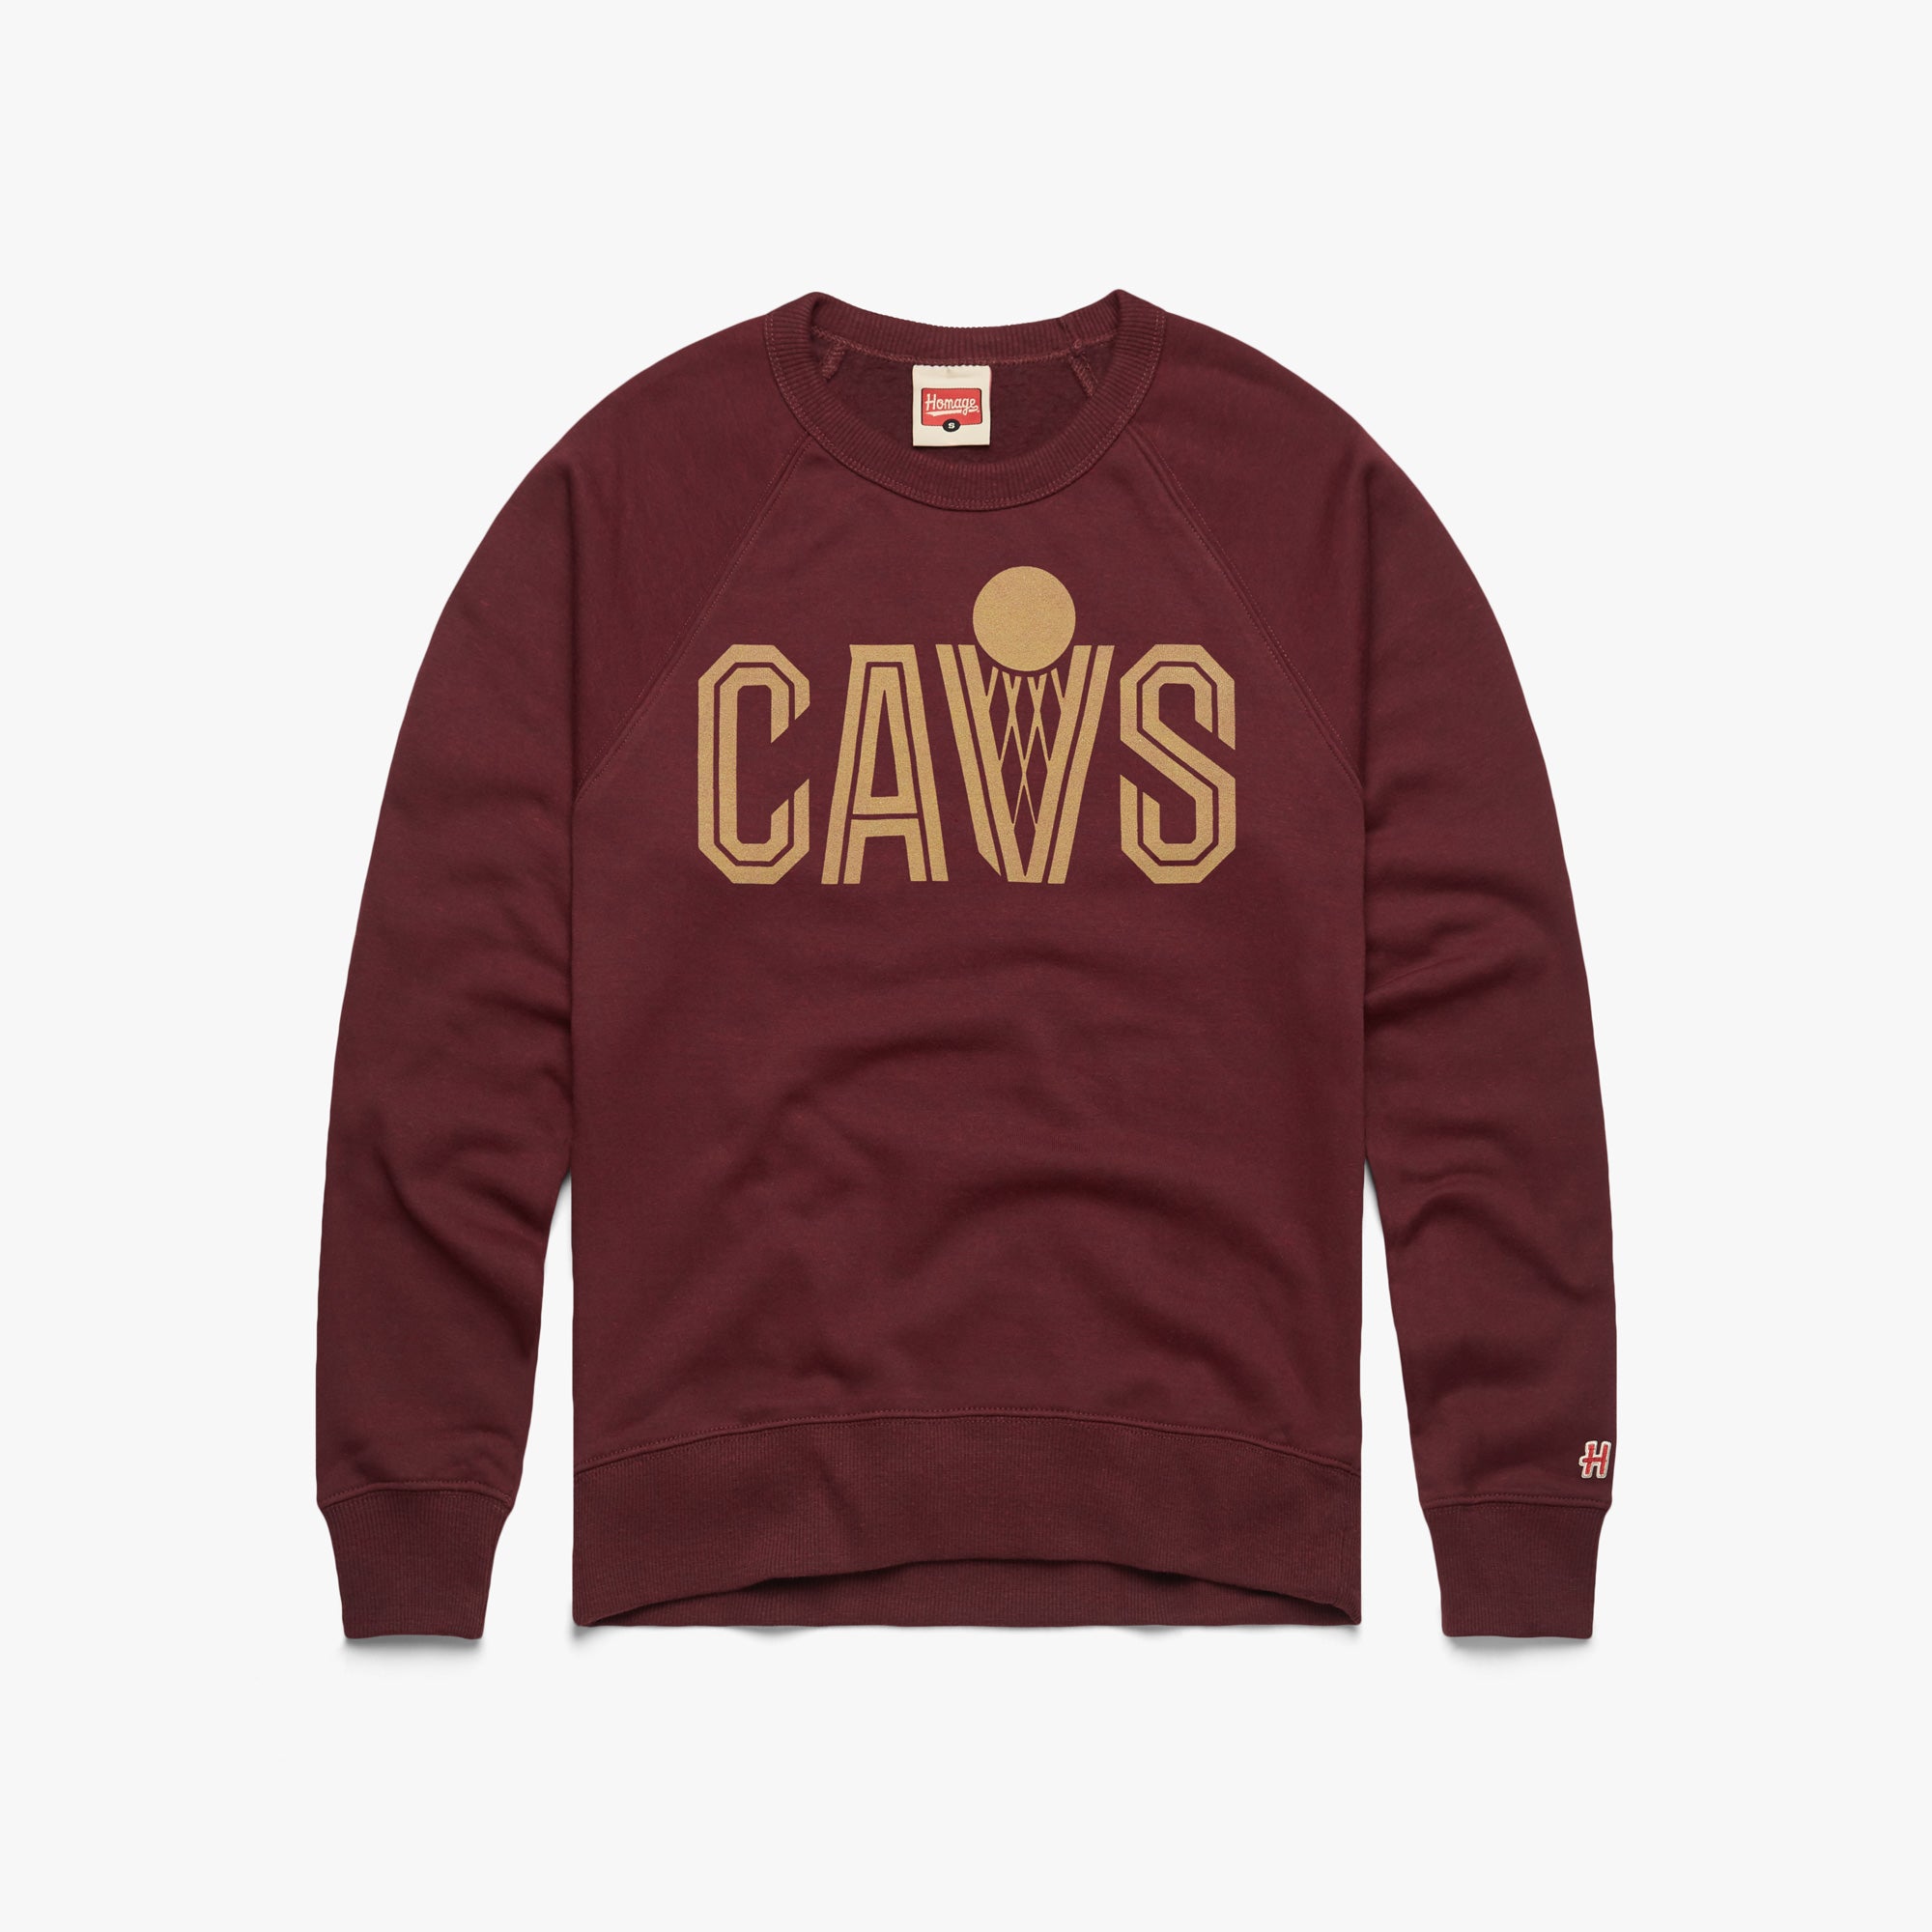 Cavs T-Shirt from Homage. | Ash | Vintage Apparel from Homage.